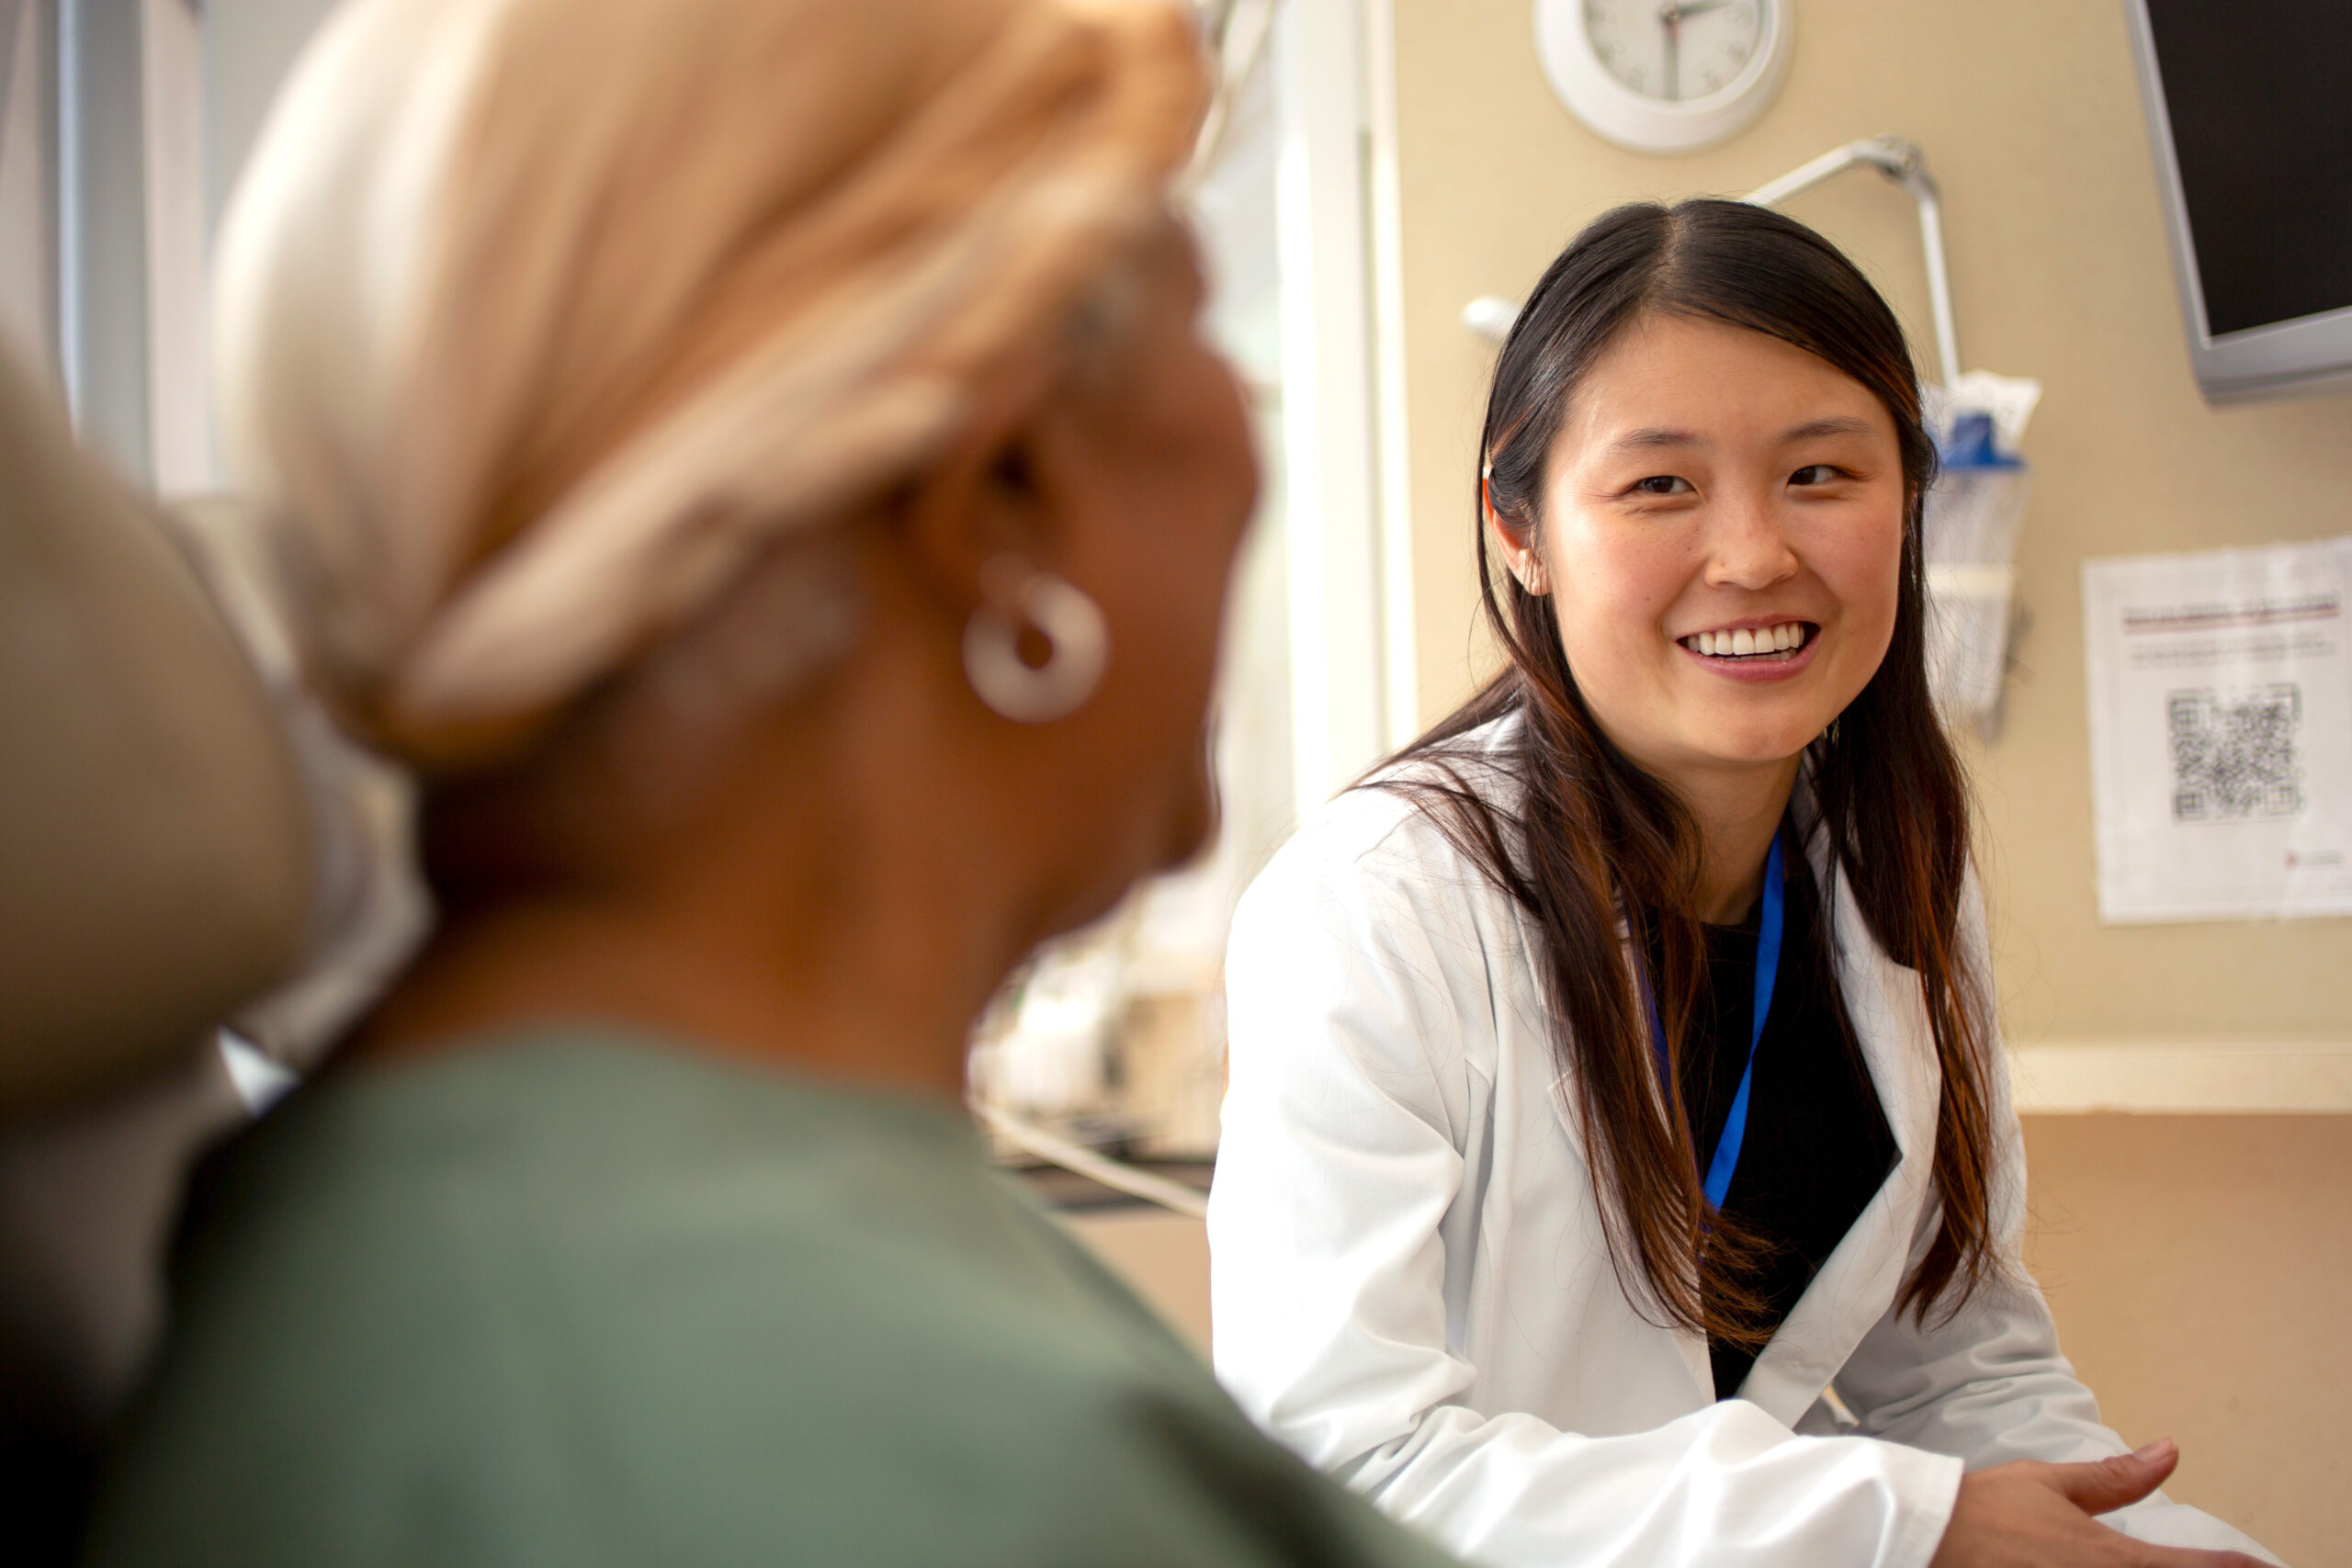 A health-system pharmacist speaking to a patient. The pharmacist is an Asian woman with long, dark hair, and the patient is in the foreground, facing away from the camera.